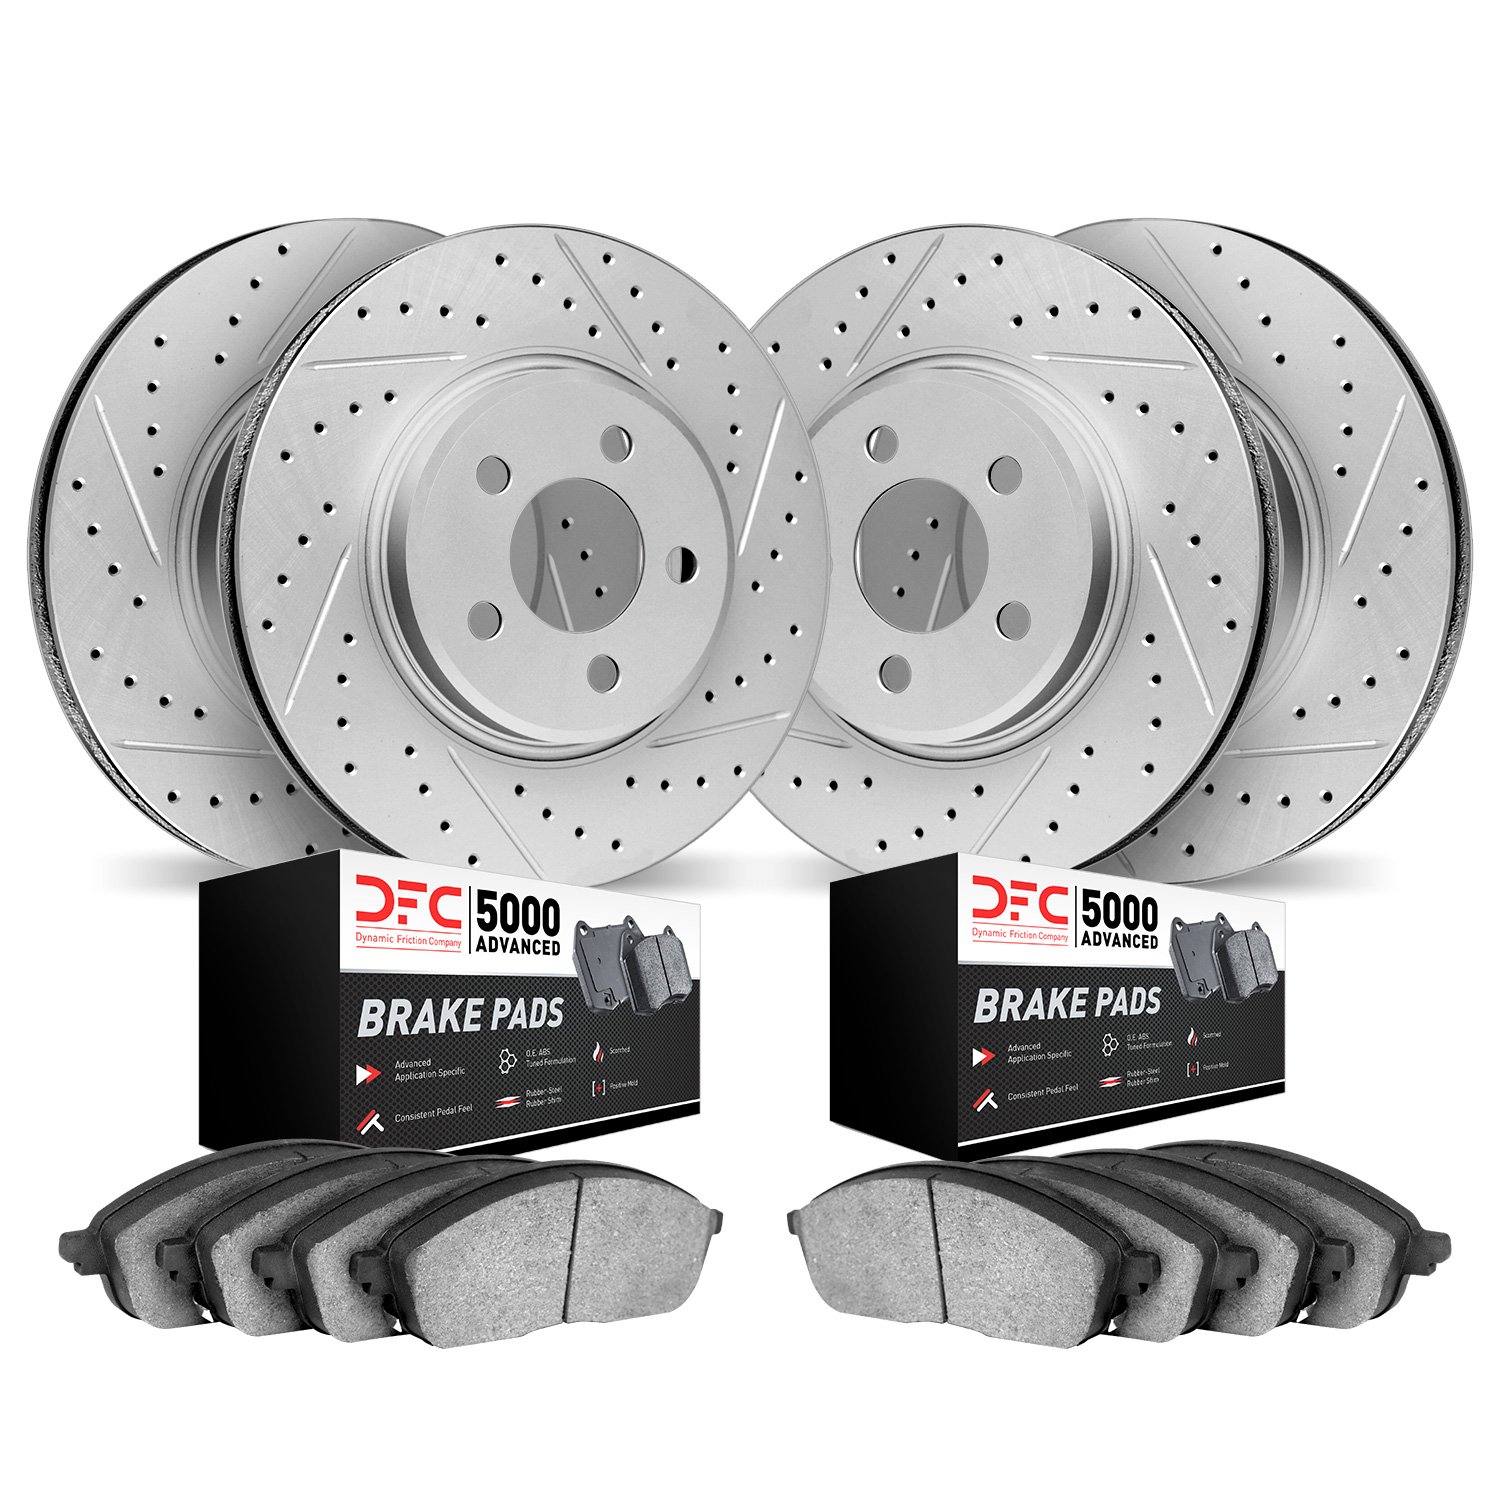 2504-31007 Geoperformance Drilled/Slotted Rotors w/5000 Advanced Brake Pads Kit, 2000-2003 BMW, Position: Front and Rear